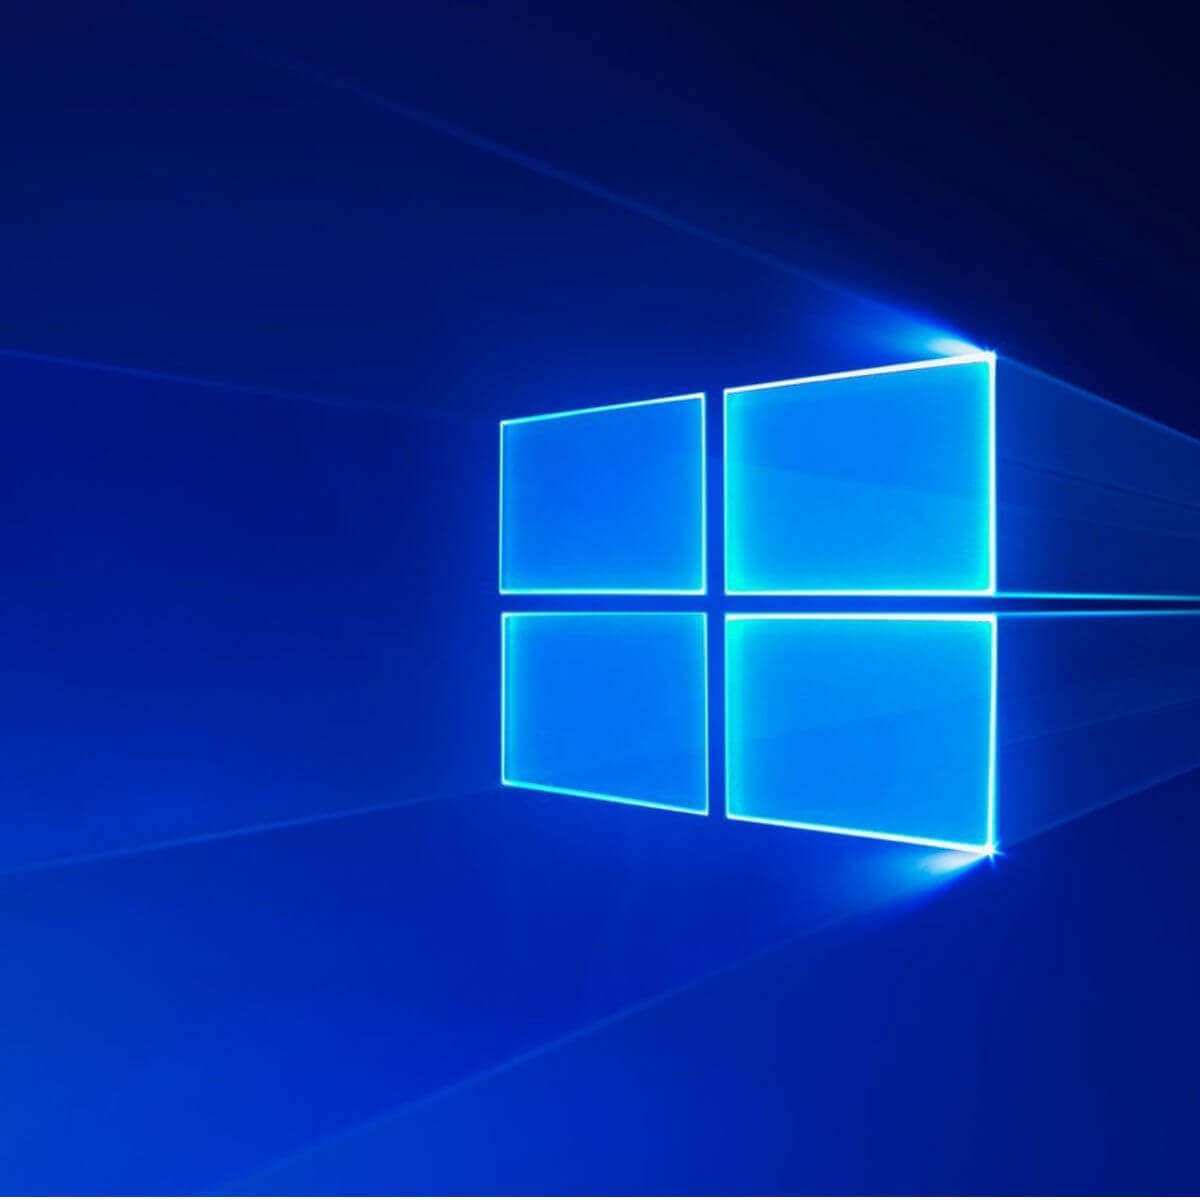 Fix Windows 10 Changes Resolution On Its Own